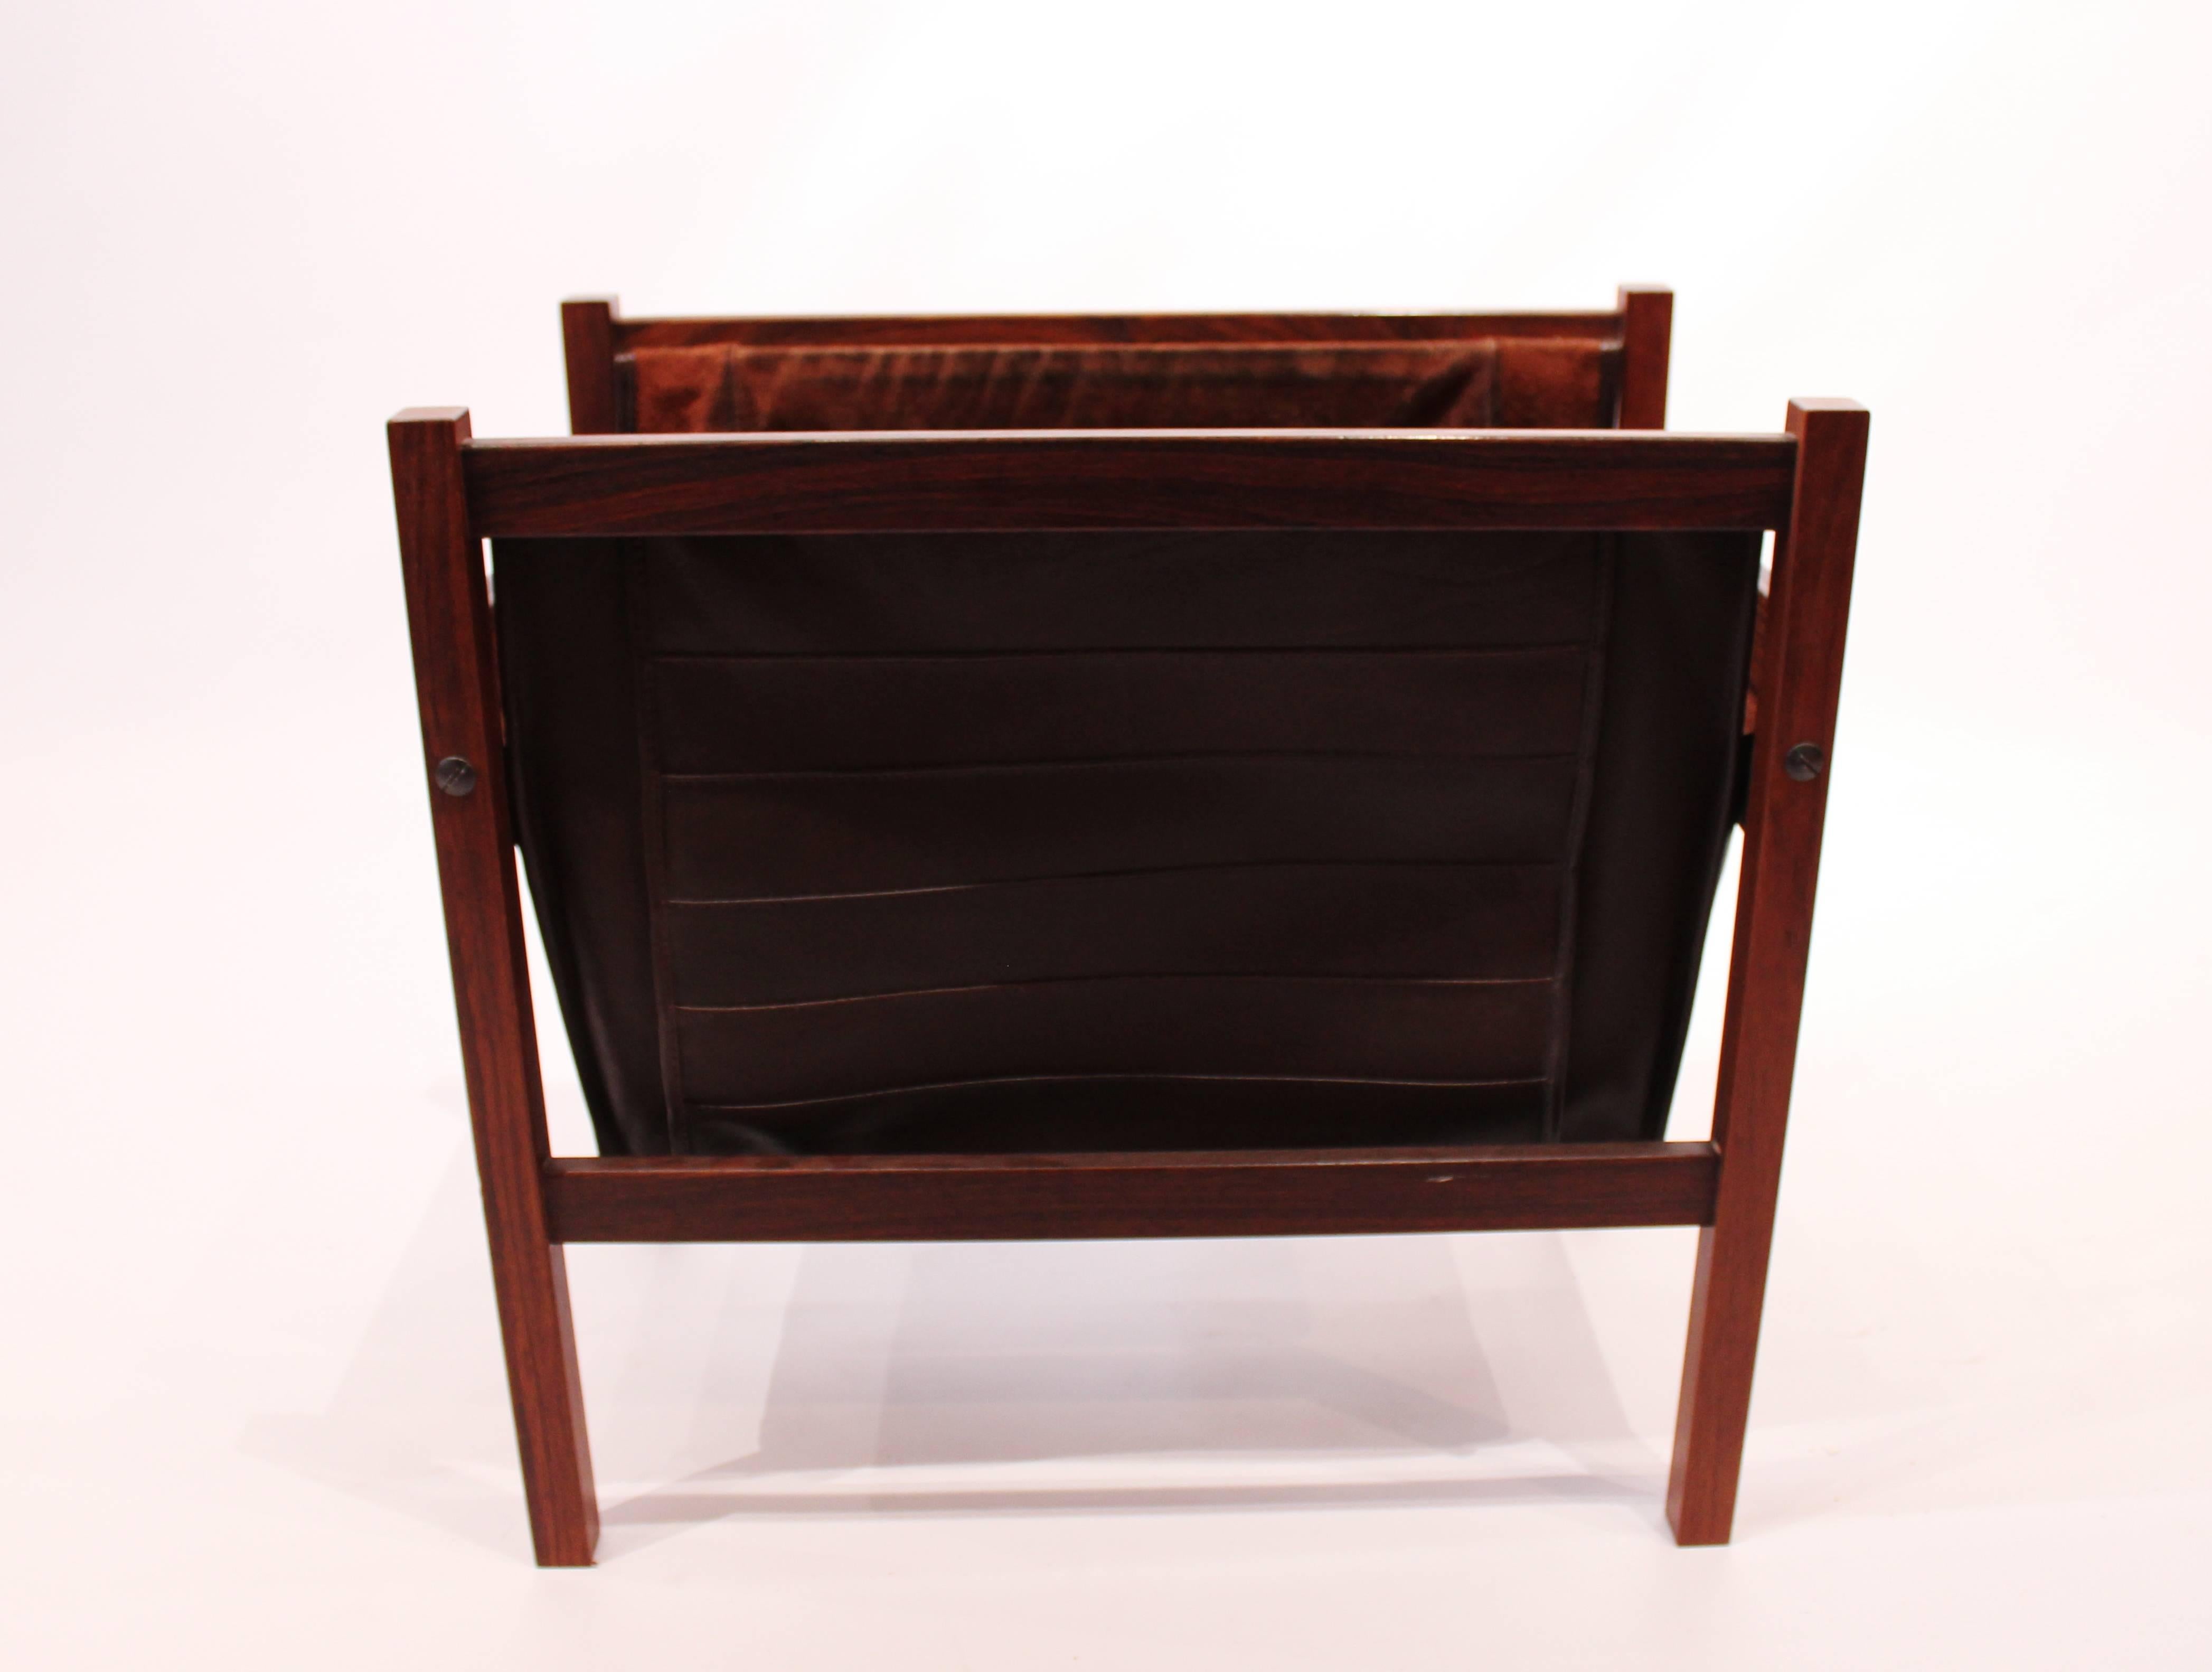 Magazine stand in rosewood, dark brown leather and suede of Danish design from the 1960s. The holder is in great vintage condition.